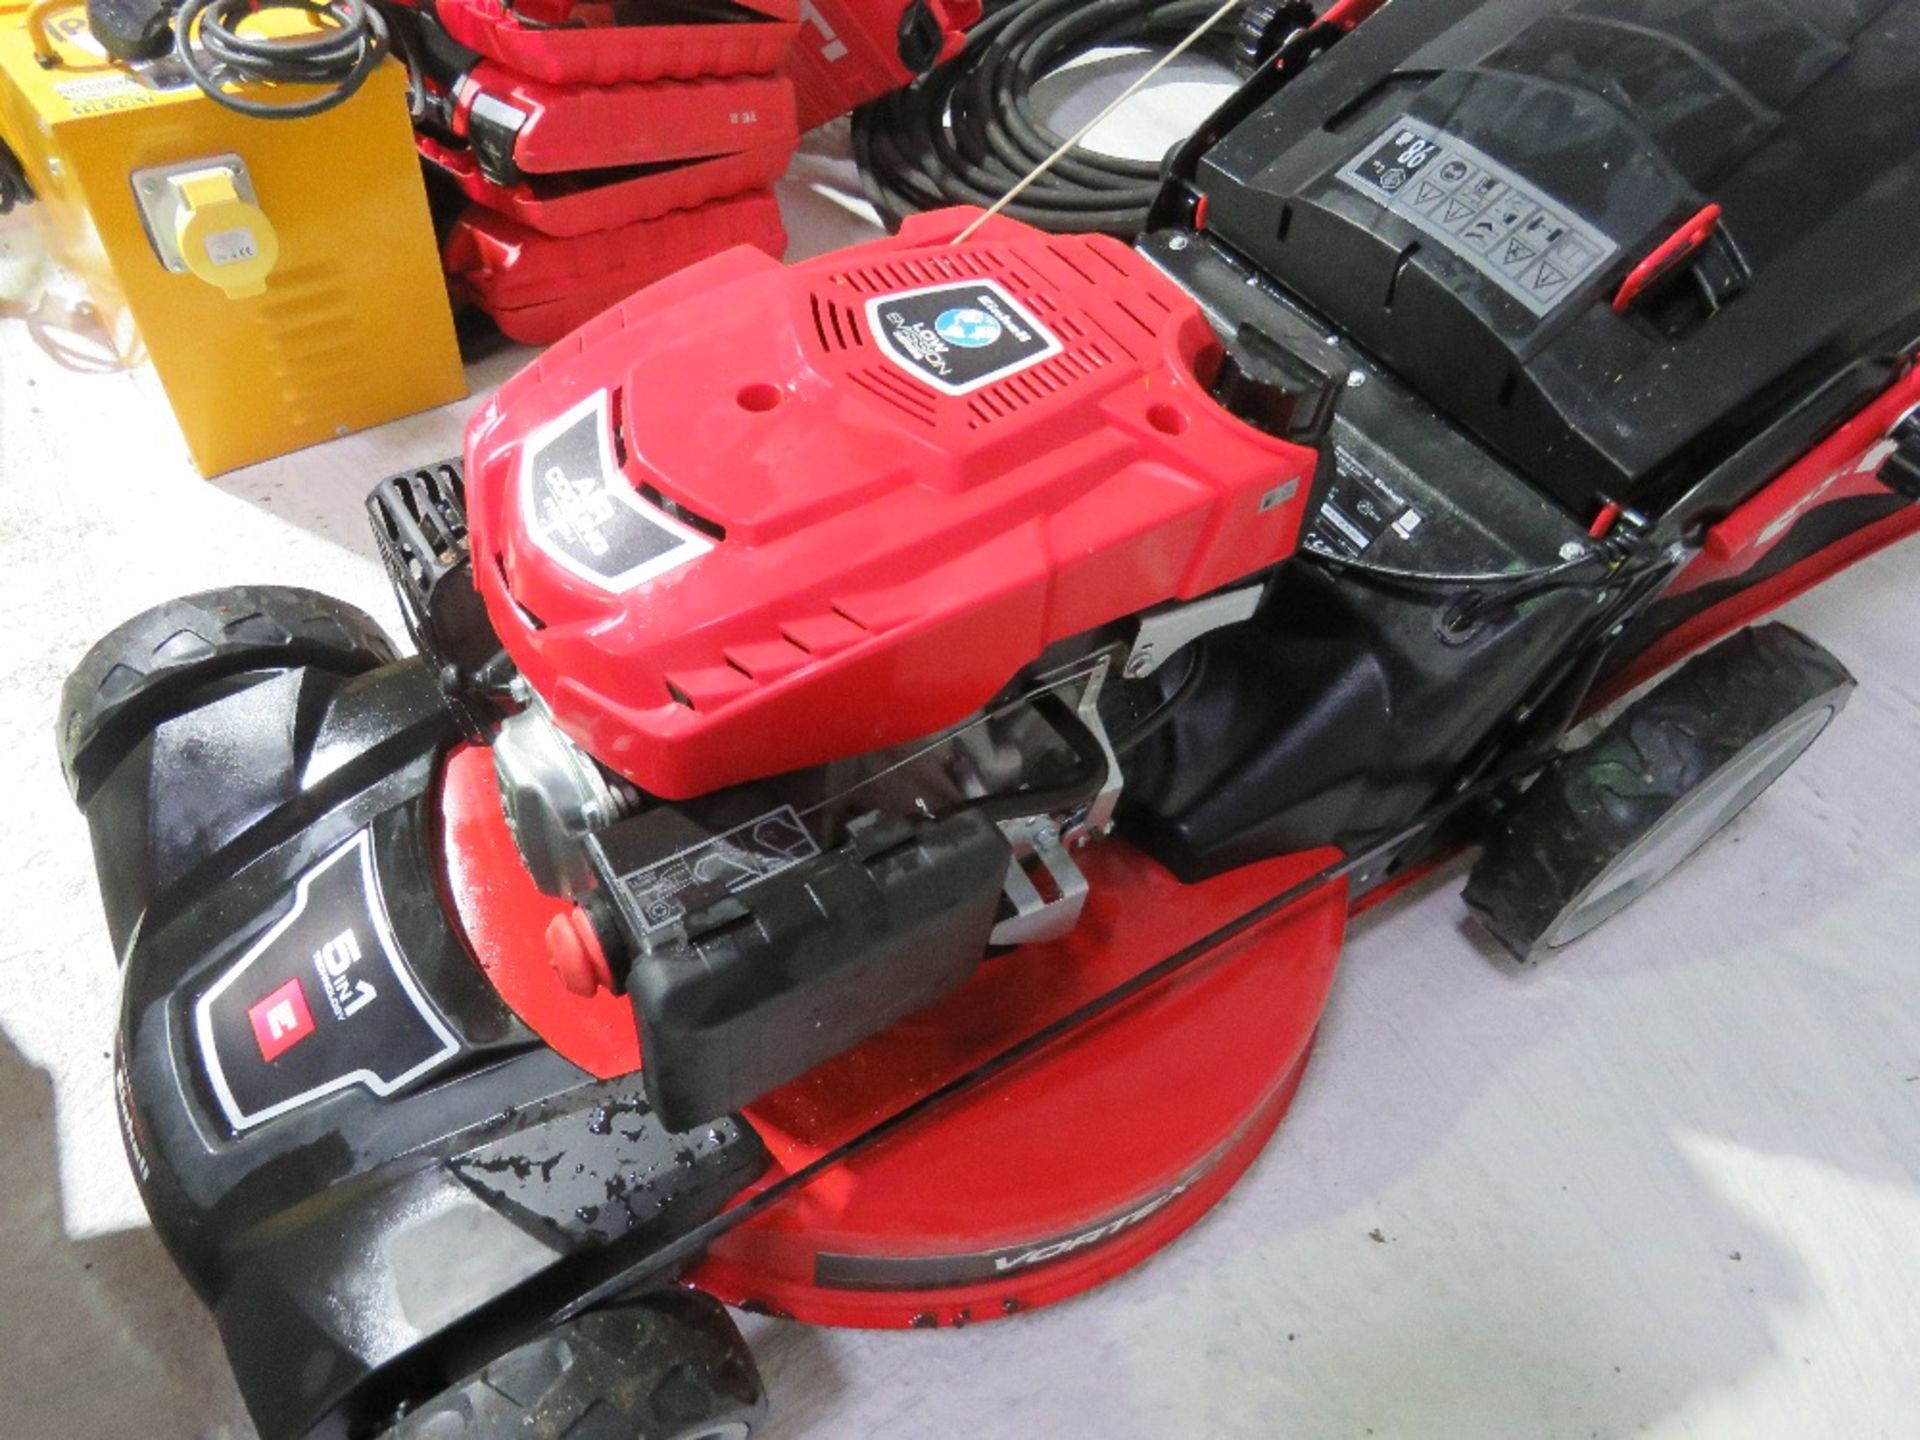 EINHELL HEAVY DUTY PETROL ENGINED MOWER WITH COLLECTOR, OWNER RETIRING. THIS LOT IS SOLD UNDER TH - Bild 3 aus 4